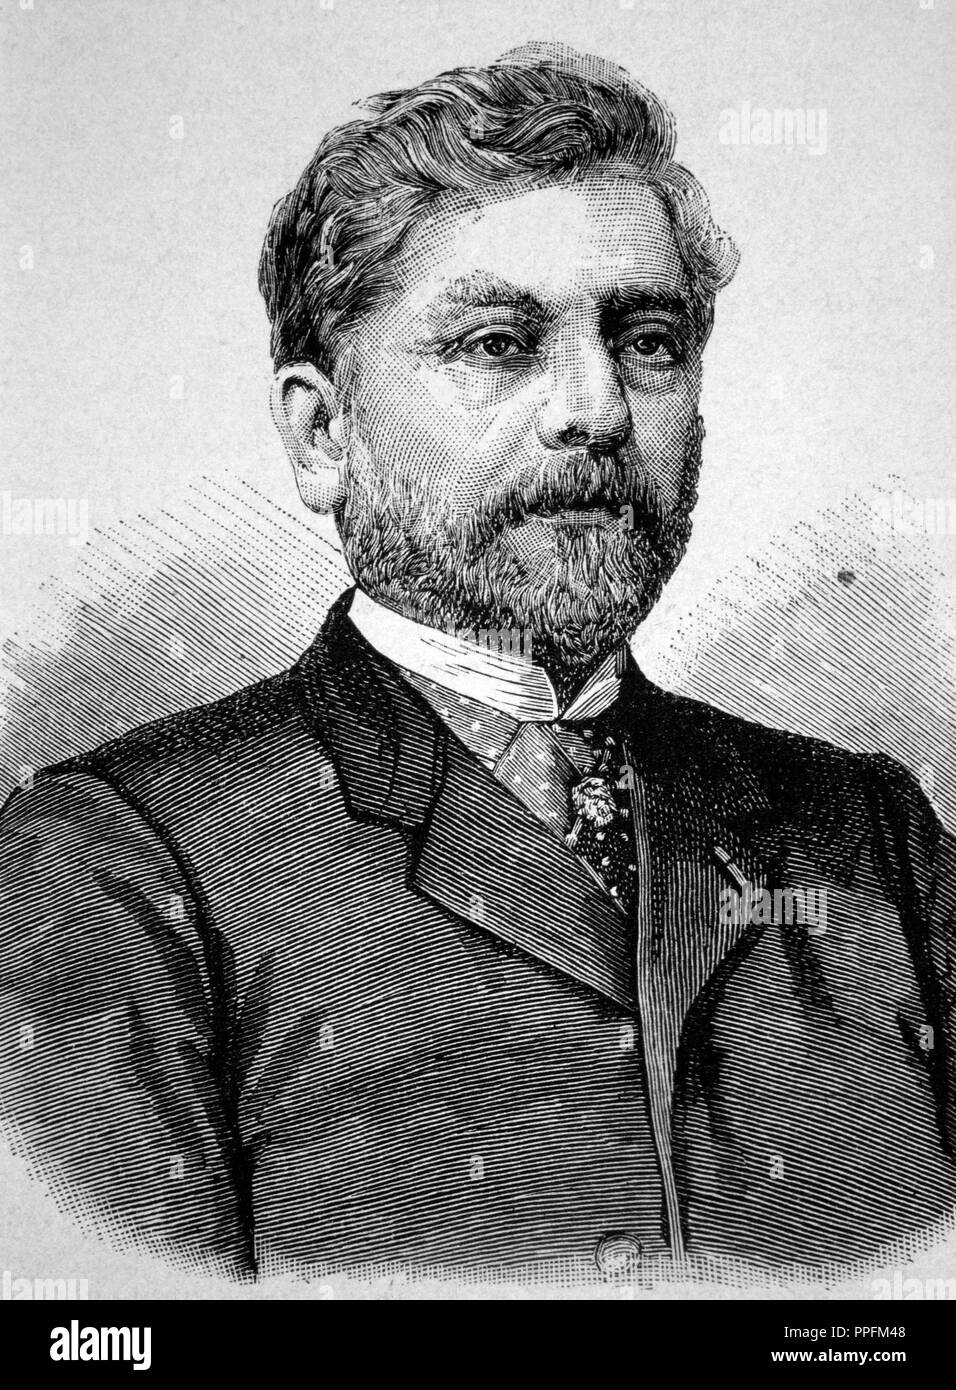 Alexandre Gustave Eiffel (1832-1923), French engineer. Stock Photo